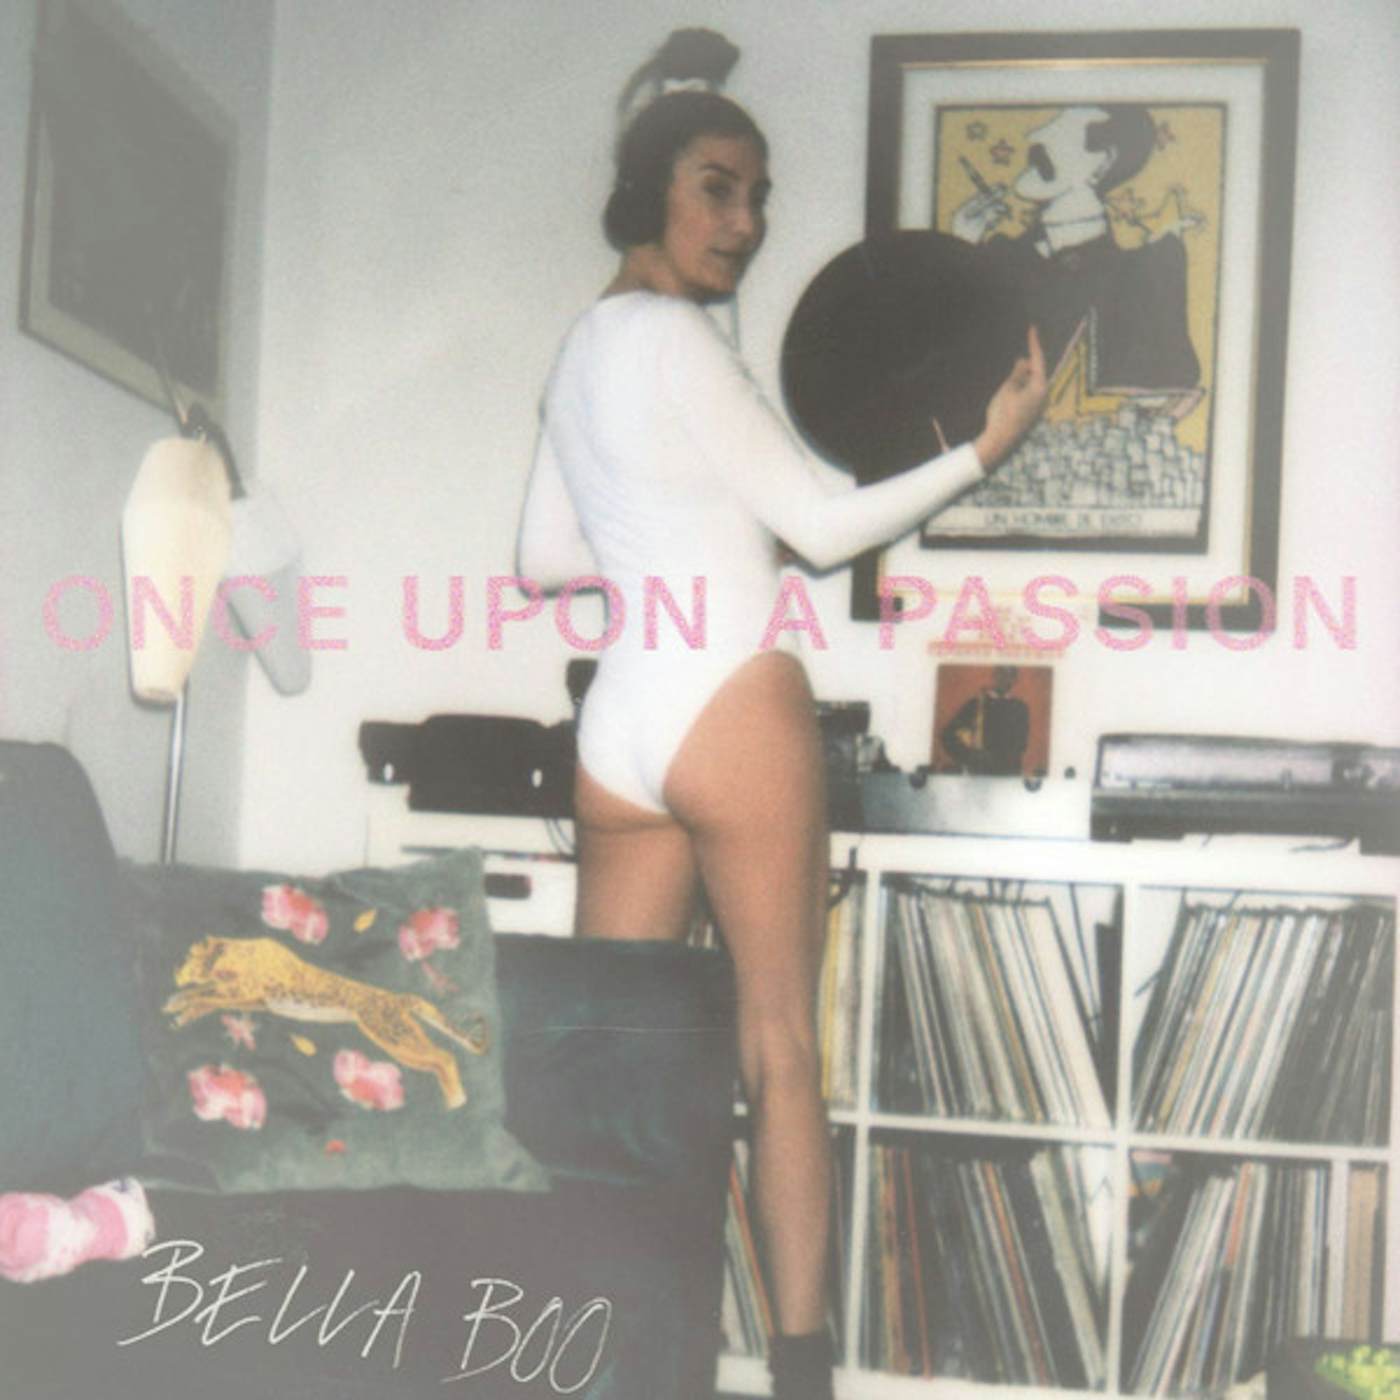 Bella Boo Once Upon A Passion Vinyl Record